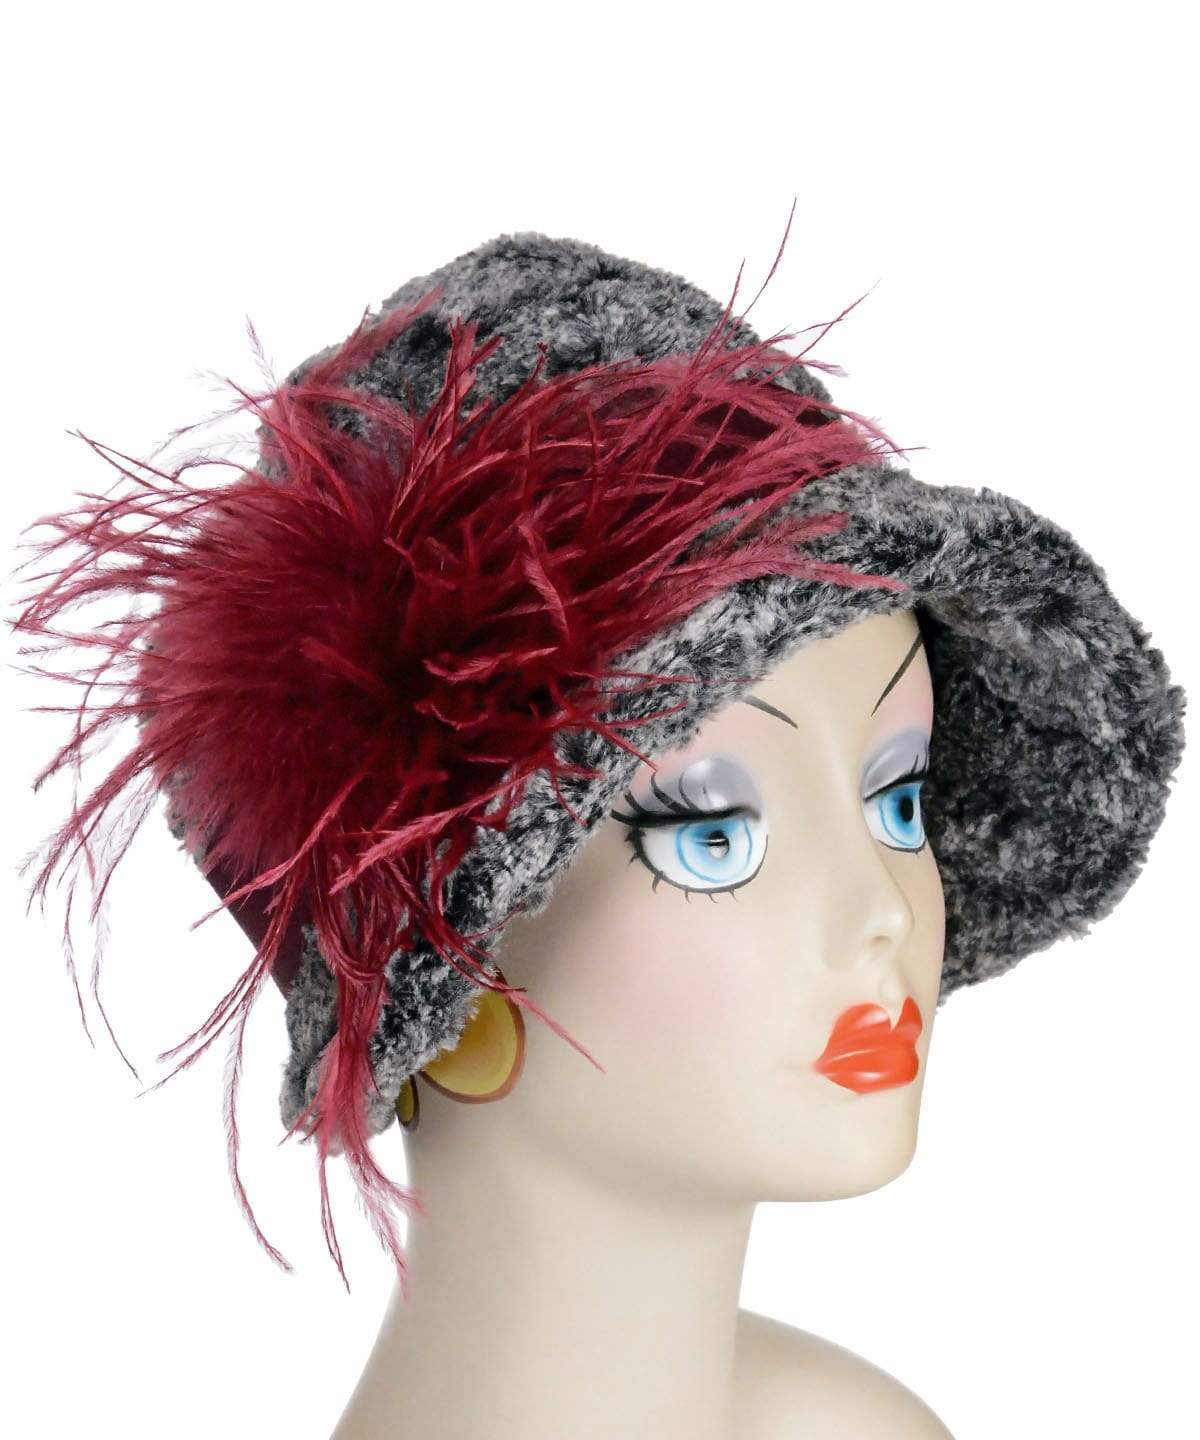 Grace Cloche Hat - Nimbus Faux Fur with Burgundy Satin Bow and Flower Button  - Handmade in USA by Pandemonium Millinery